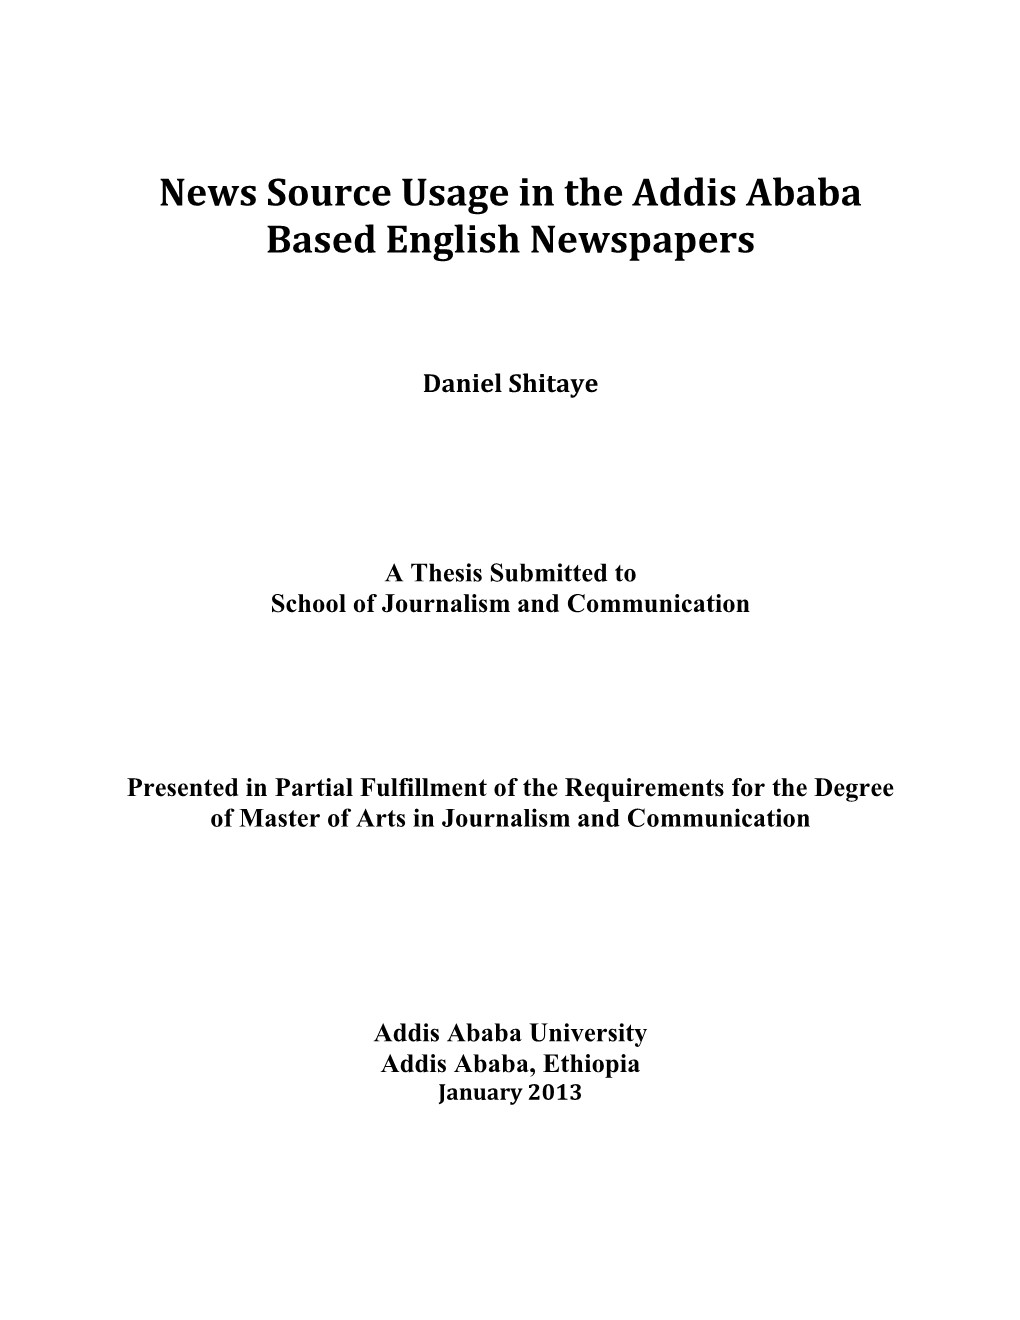 News Source Usage in the Addis Ababa Based English Newspapers